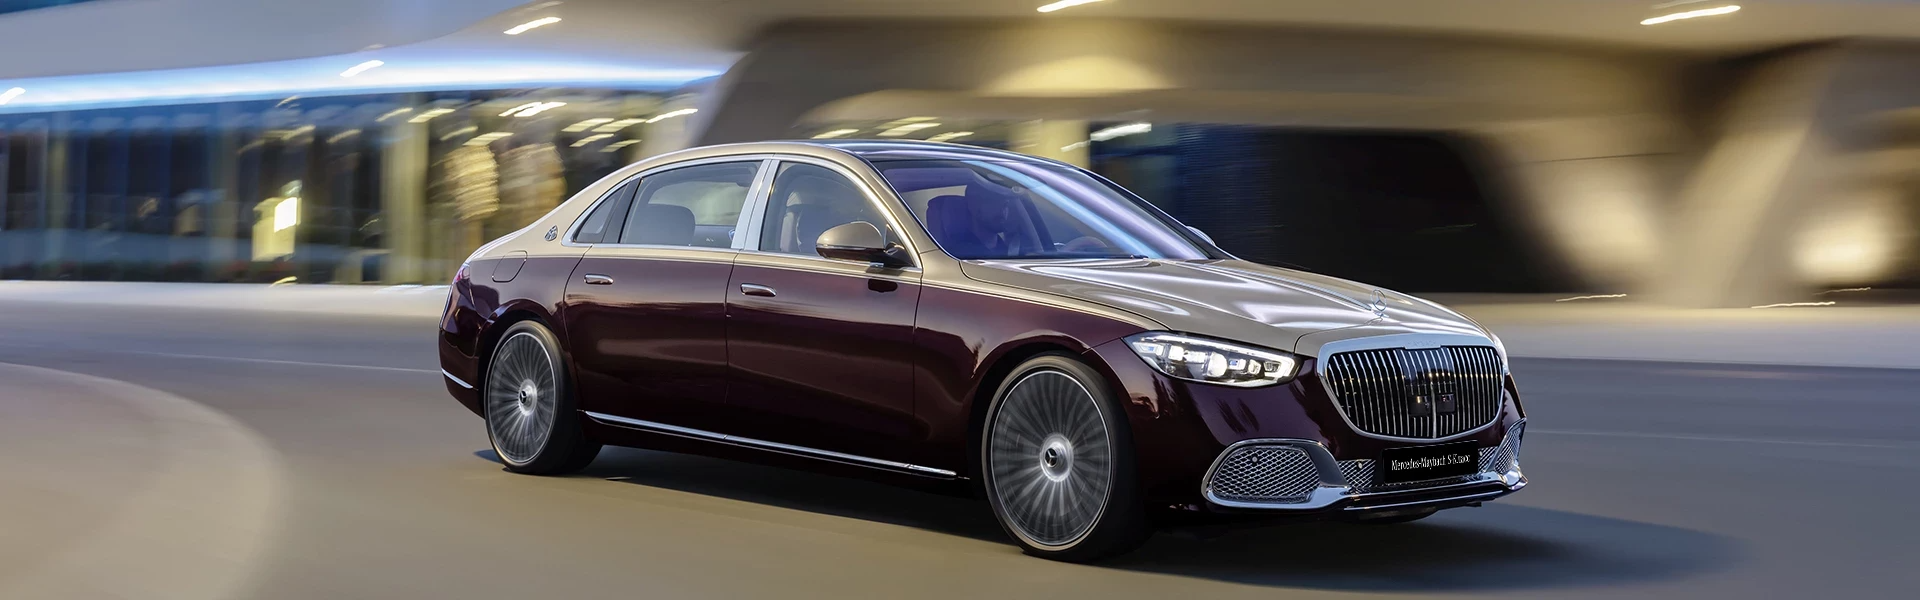 Mercedes-AMG S-Класс Mercedes-Maybach